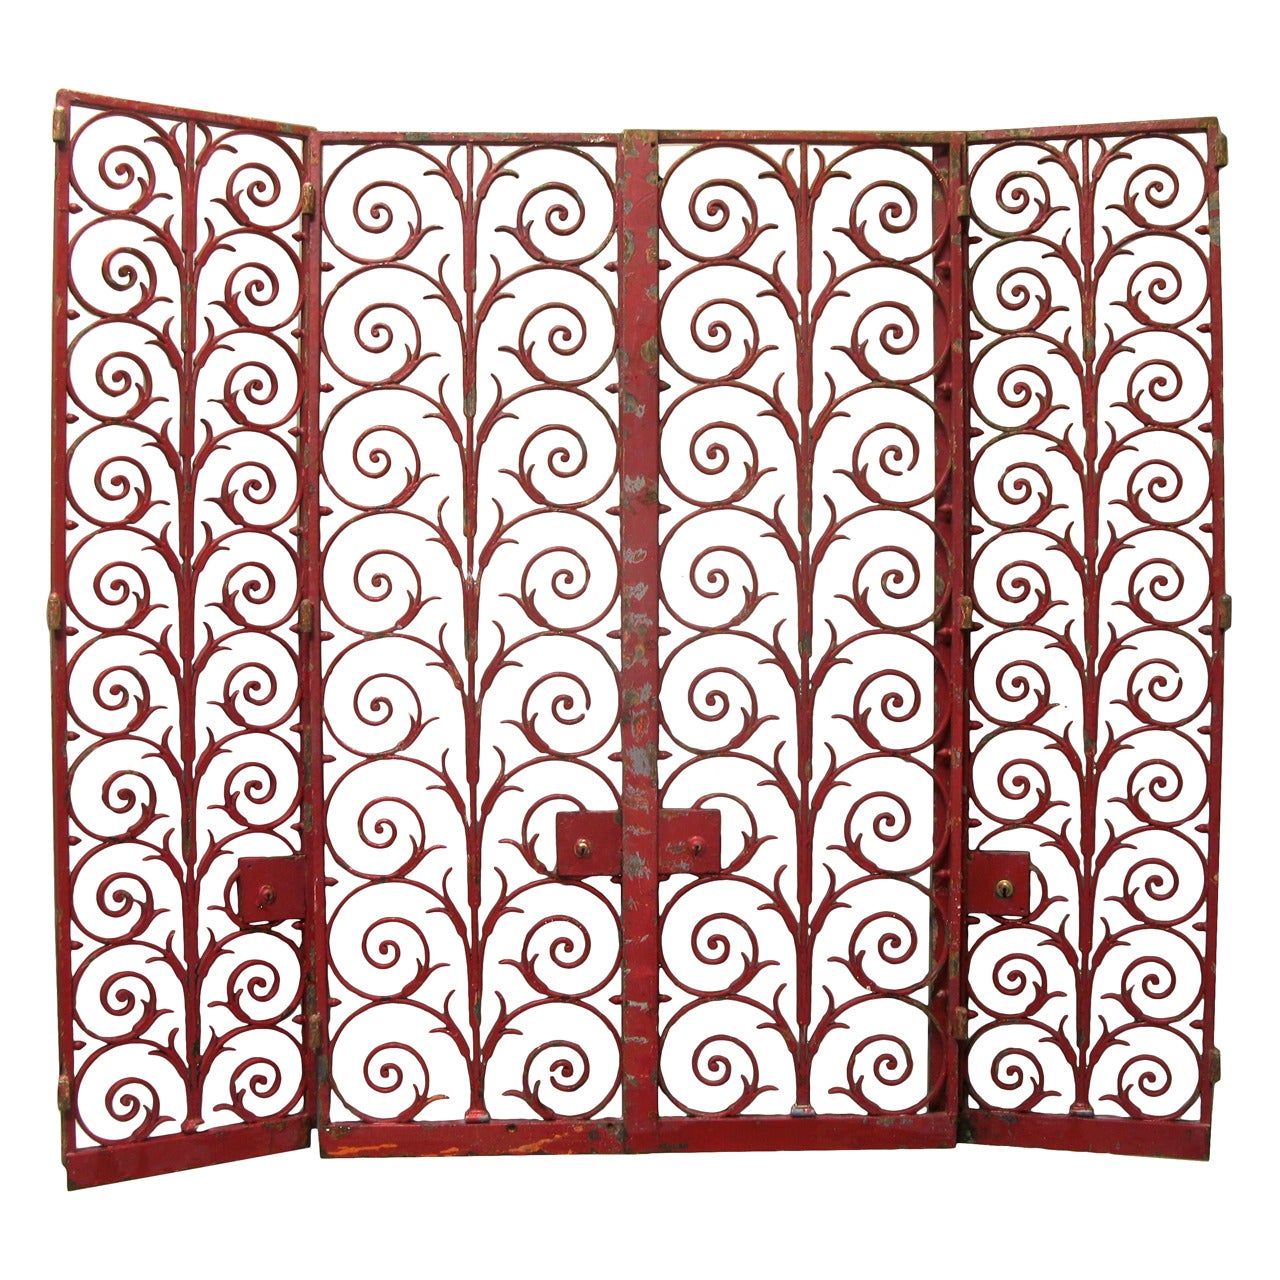 French Art Deco Wrought Iron Grilles For Sale